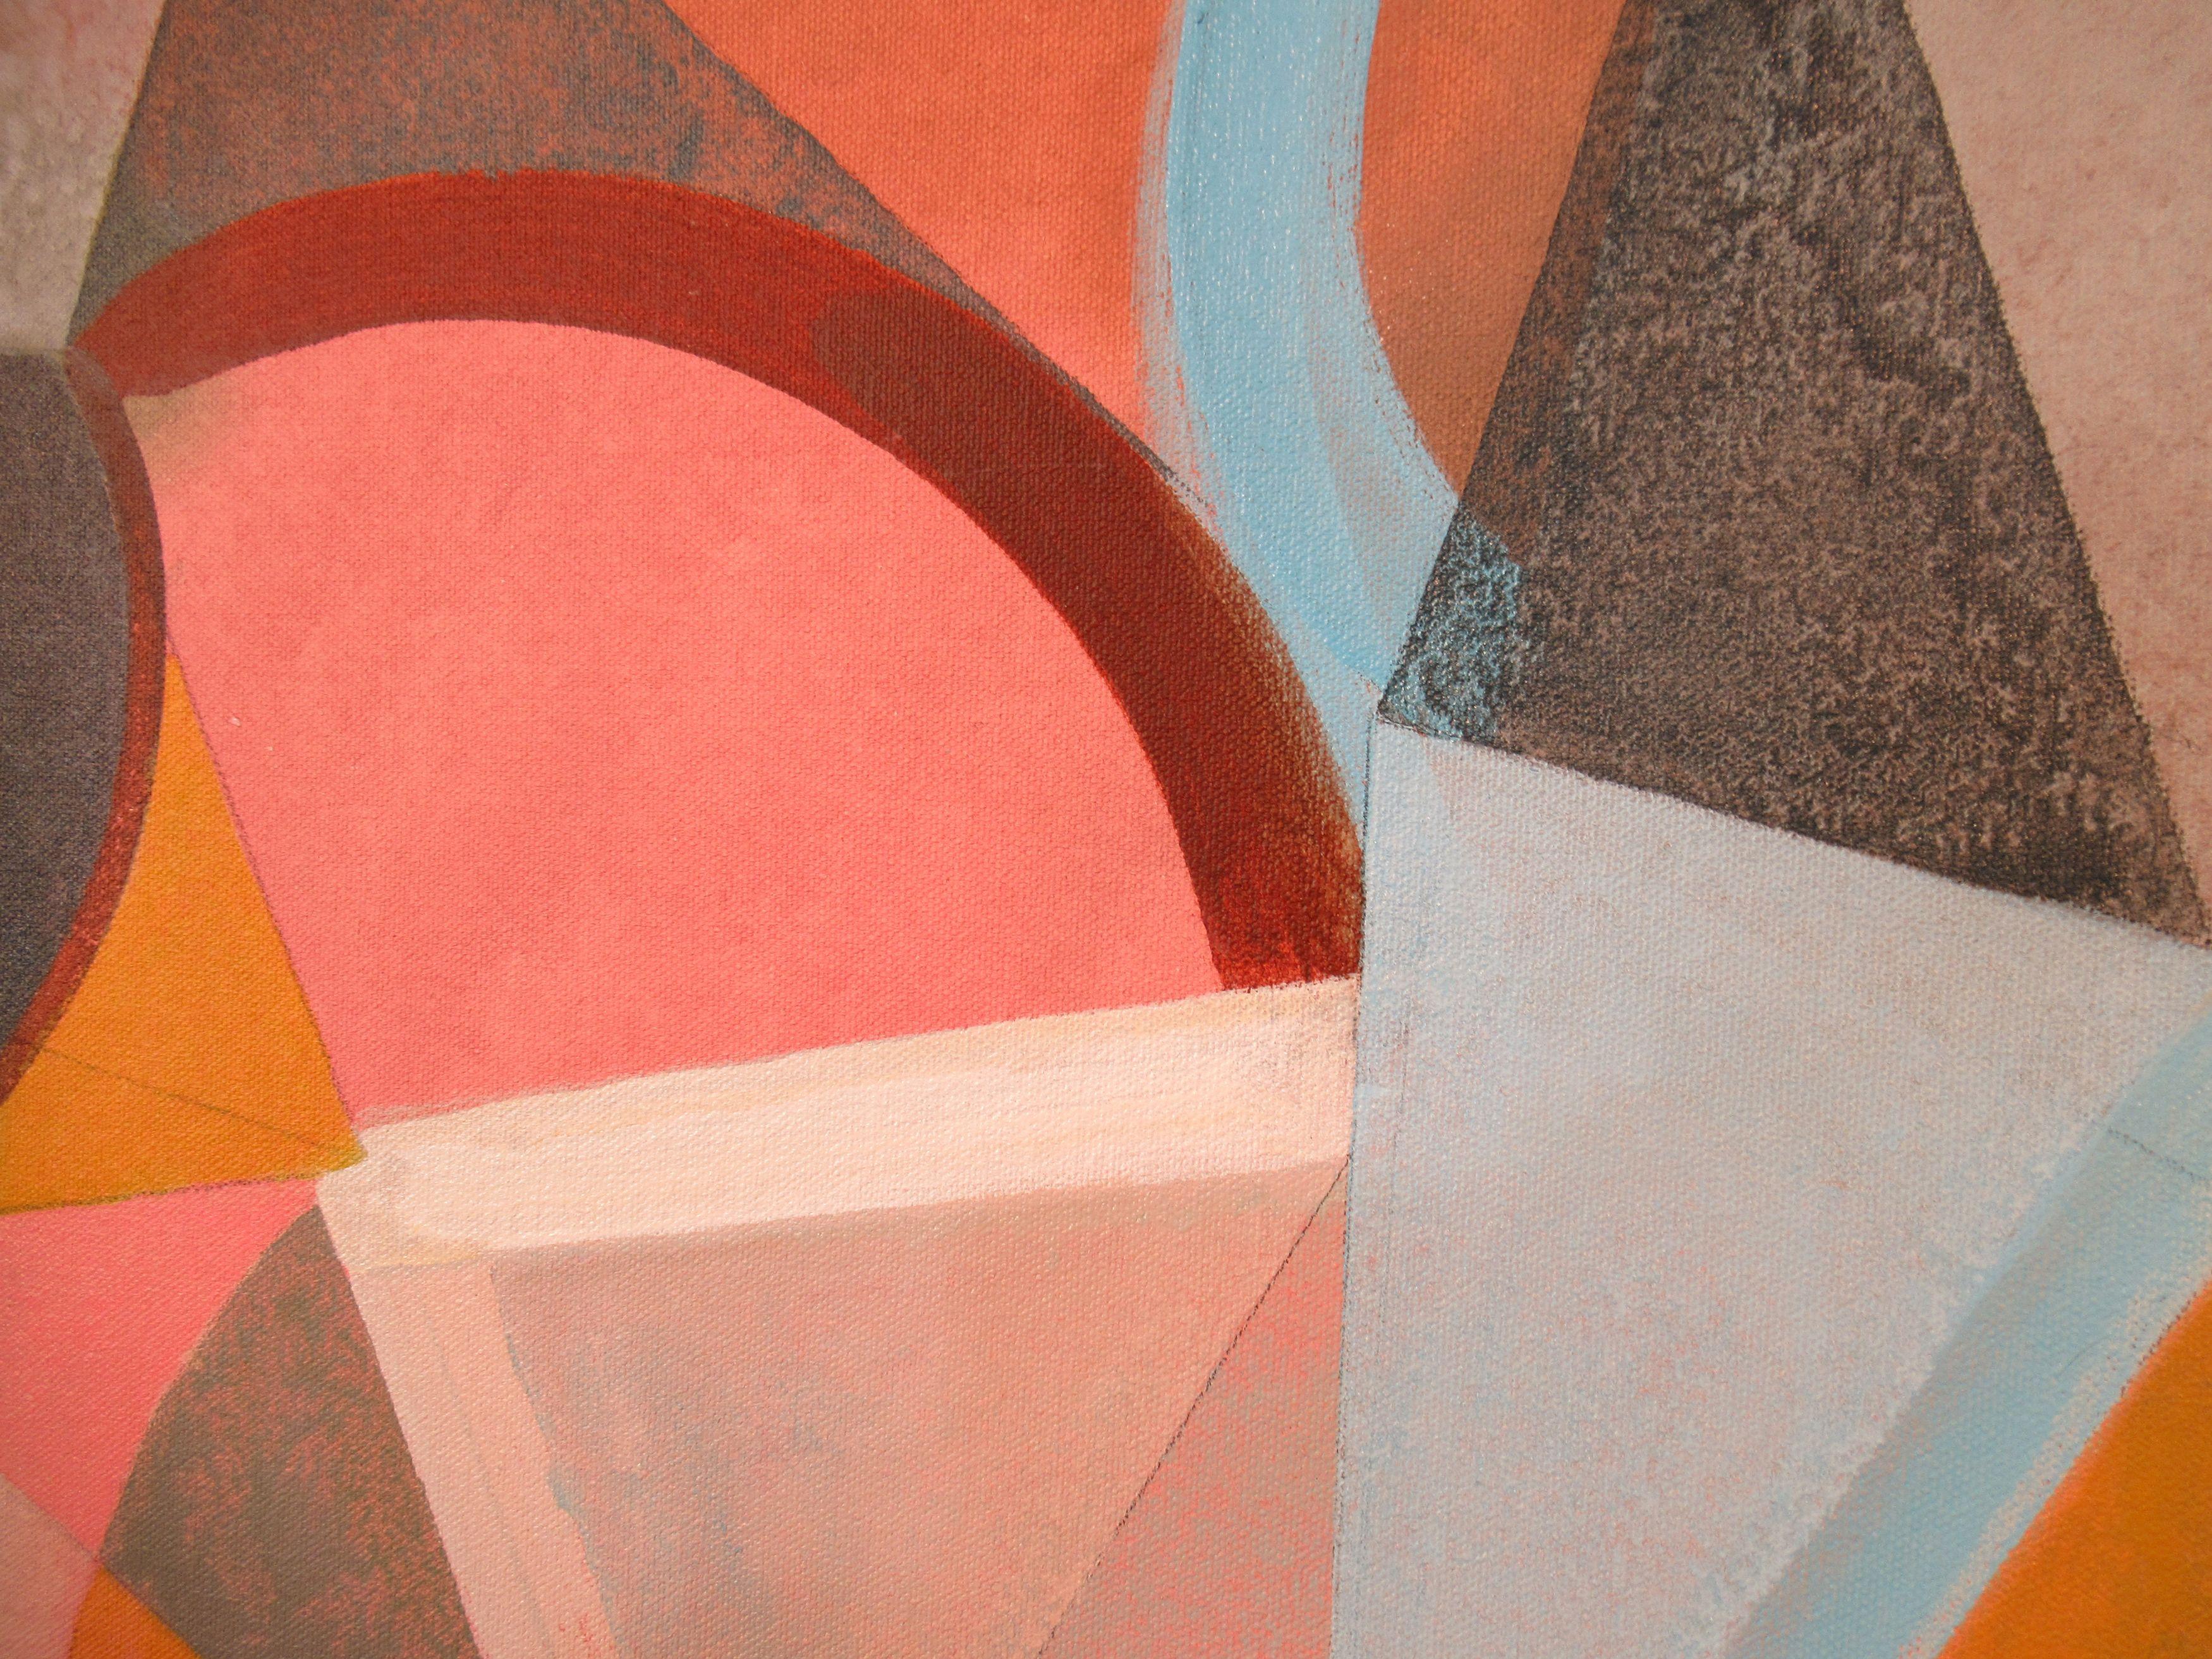 A colorful composition combining bold angular brushstrokes with simple hard edged geometric shapes. Pinks and yellow are juxtaposed with warm grays and browns. An optimistic painting, I think. :: Painting :: Abstract :: This piece comes with an